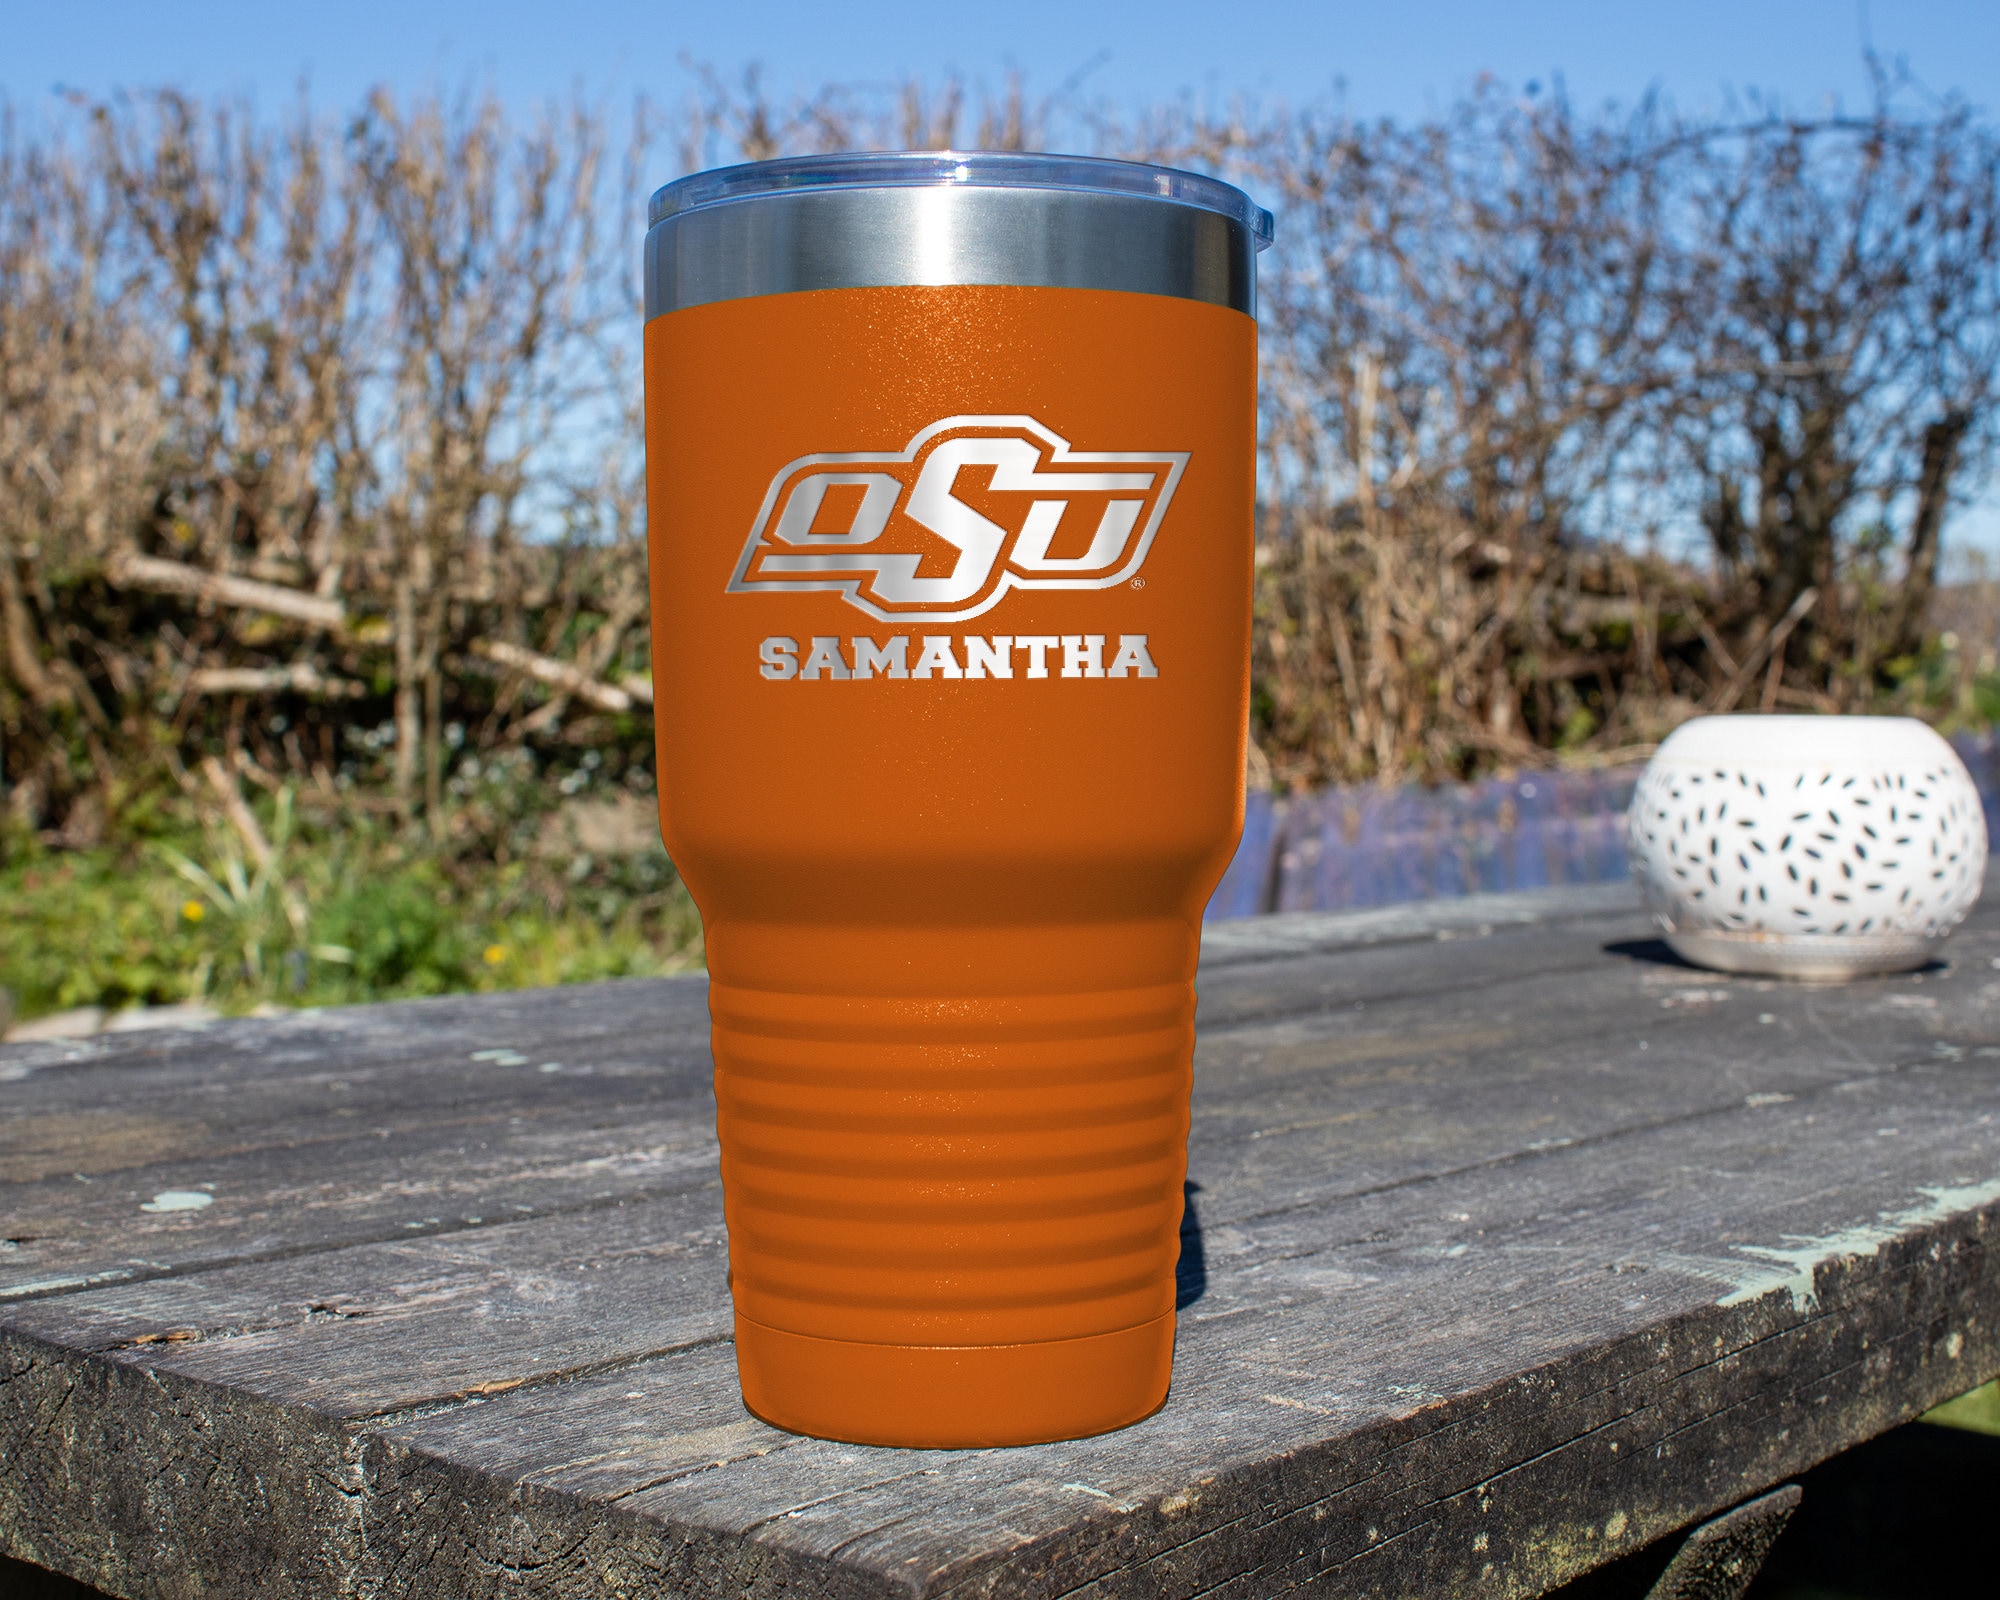 Handcrafted Paracord Tumbler Handle, Orange and Black, Oklahoma State  University, SF Giants, Baltimore Orioles, Yeti, Rtic, Mossy Oak